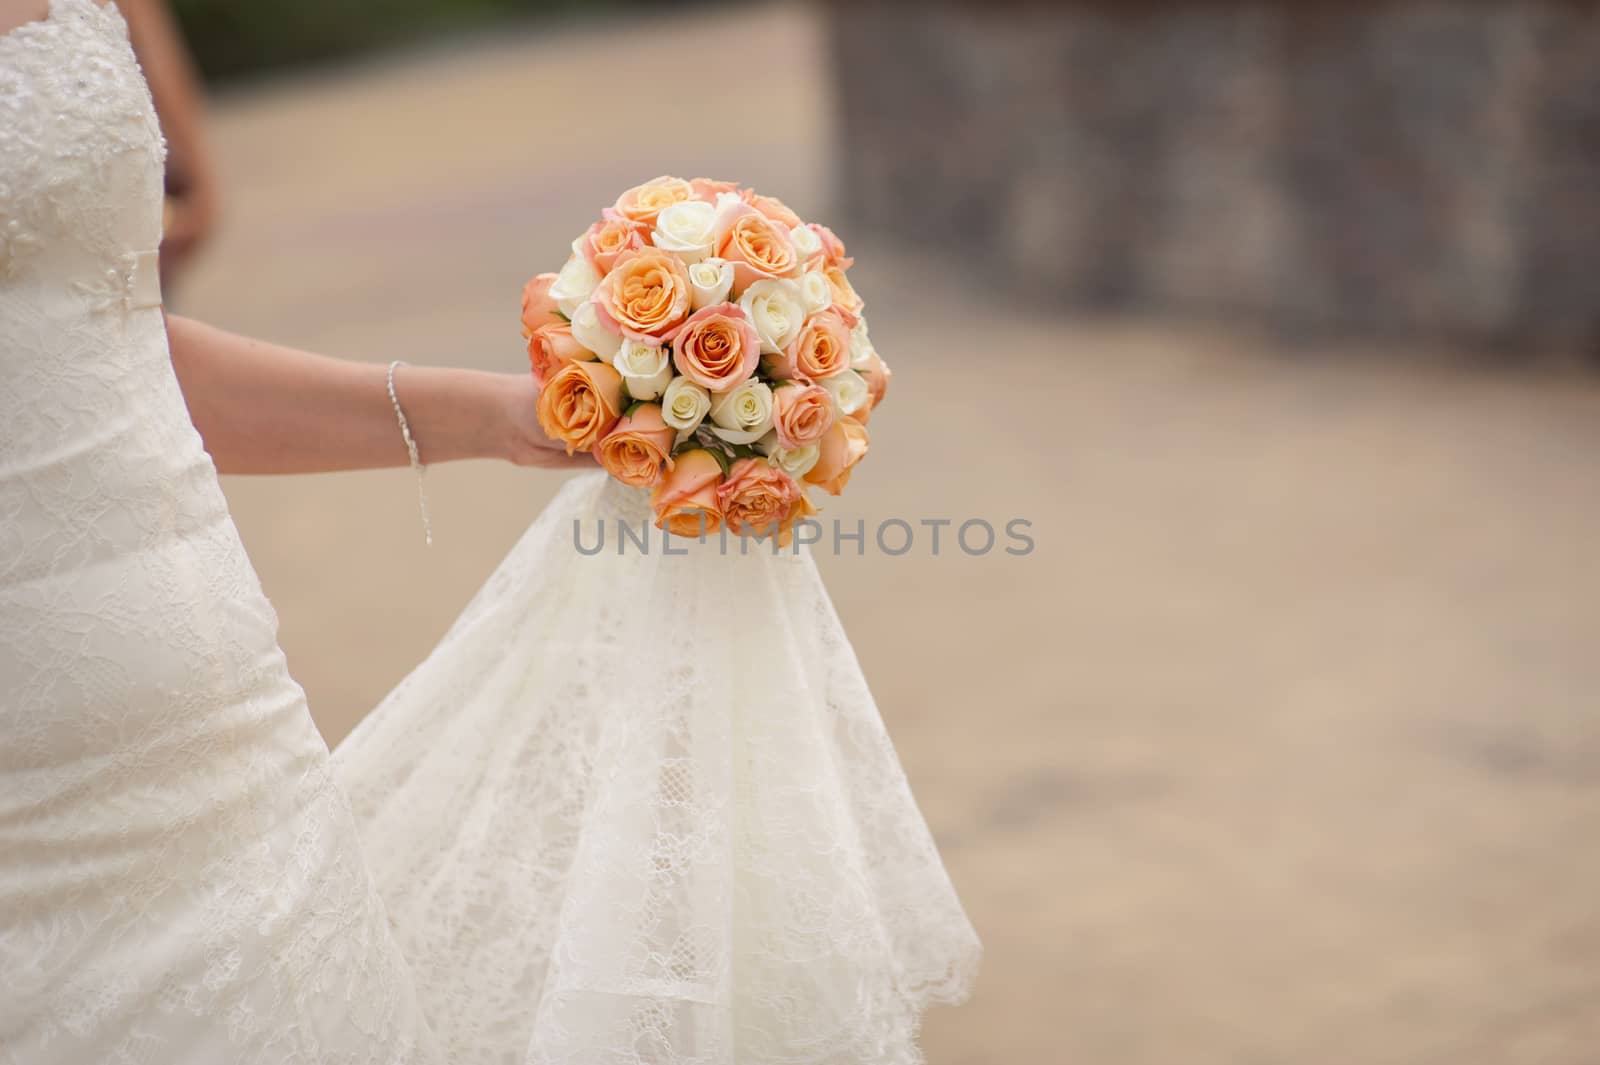 wedding bouquet at bride's hands  by timonko